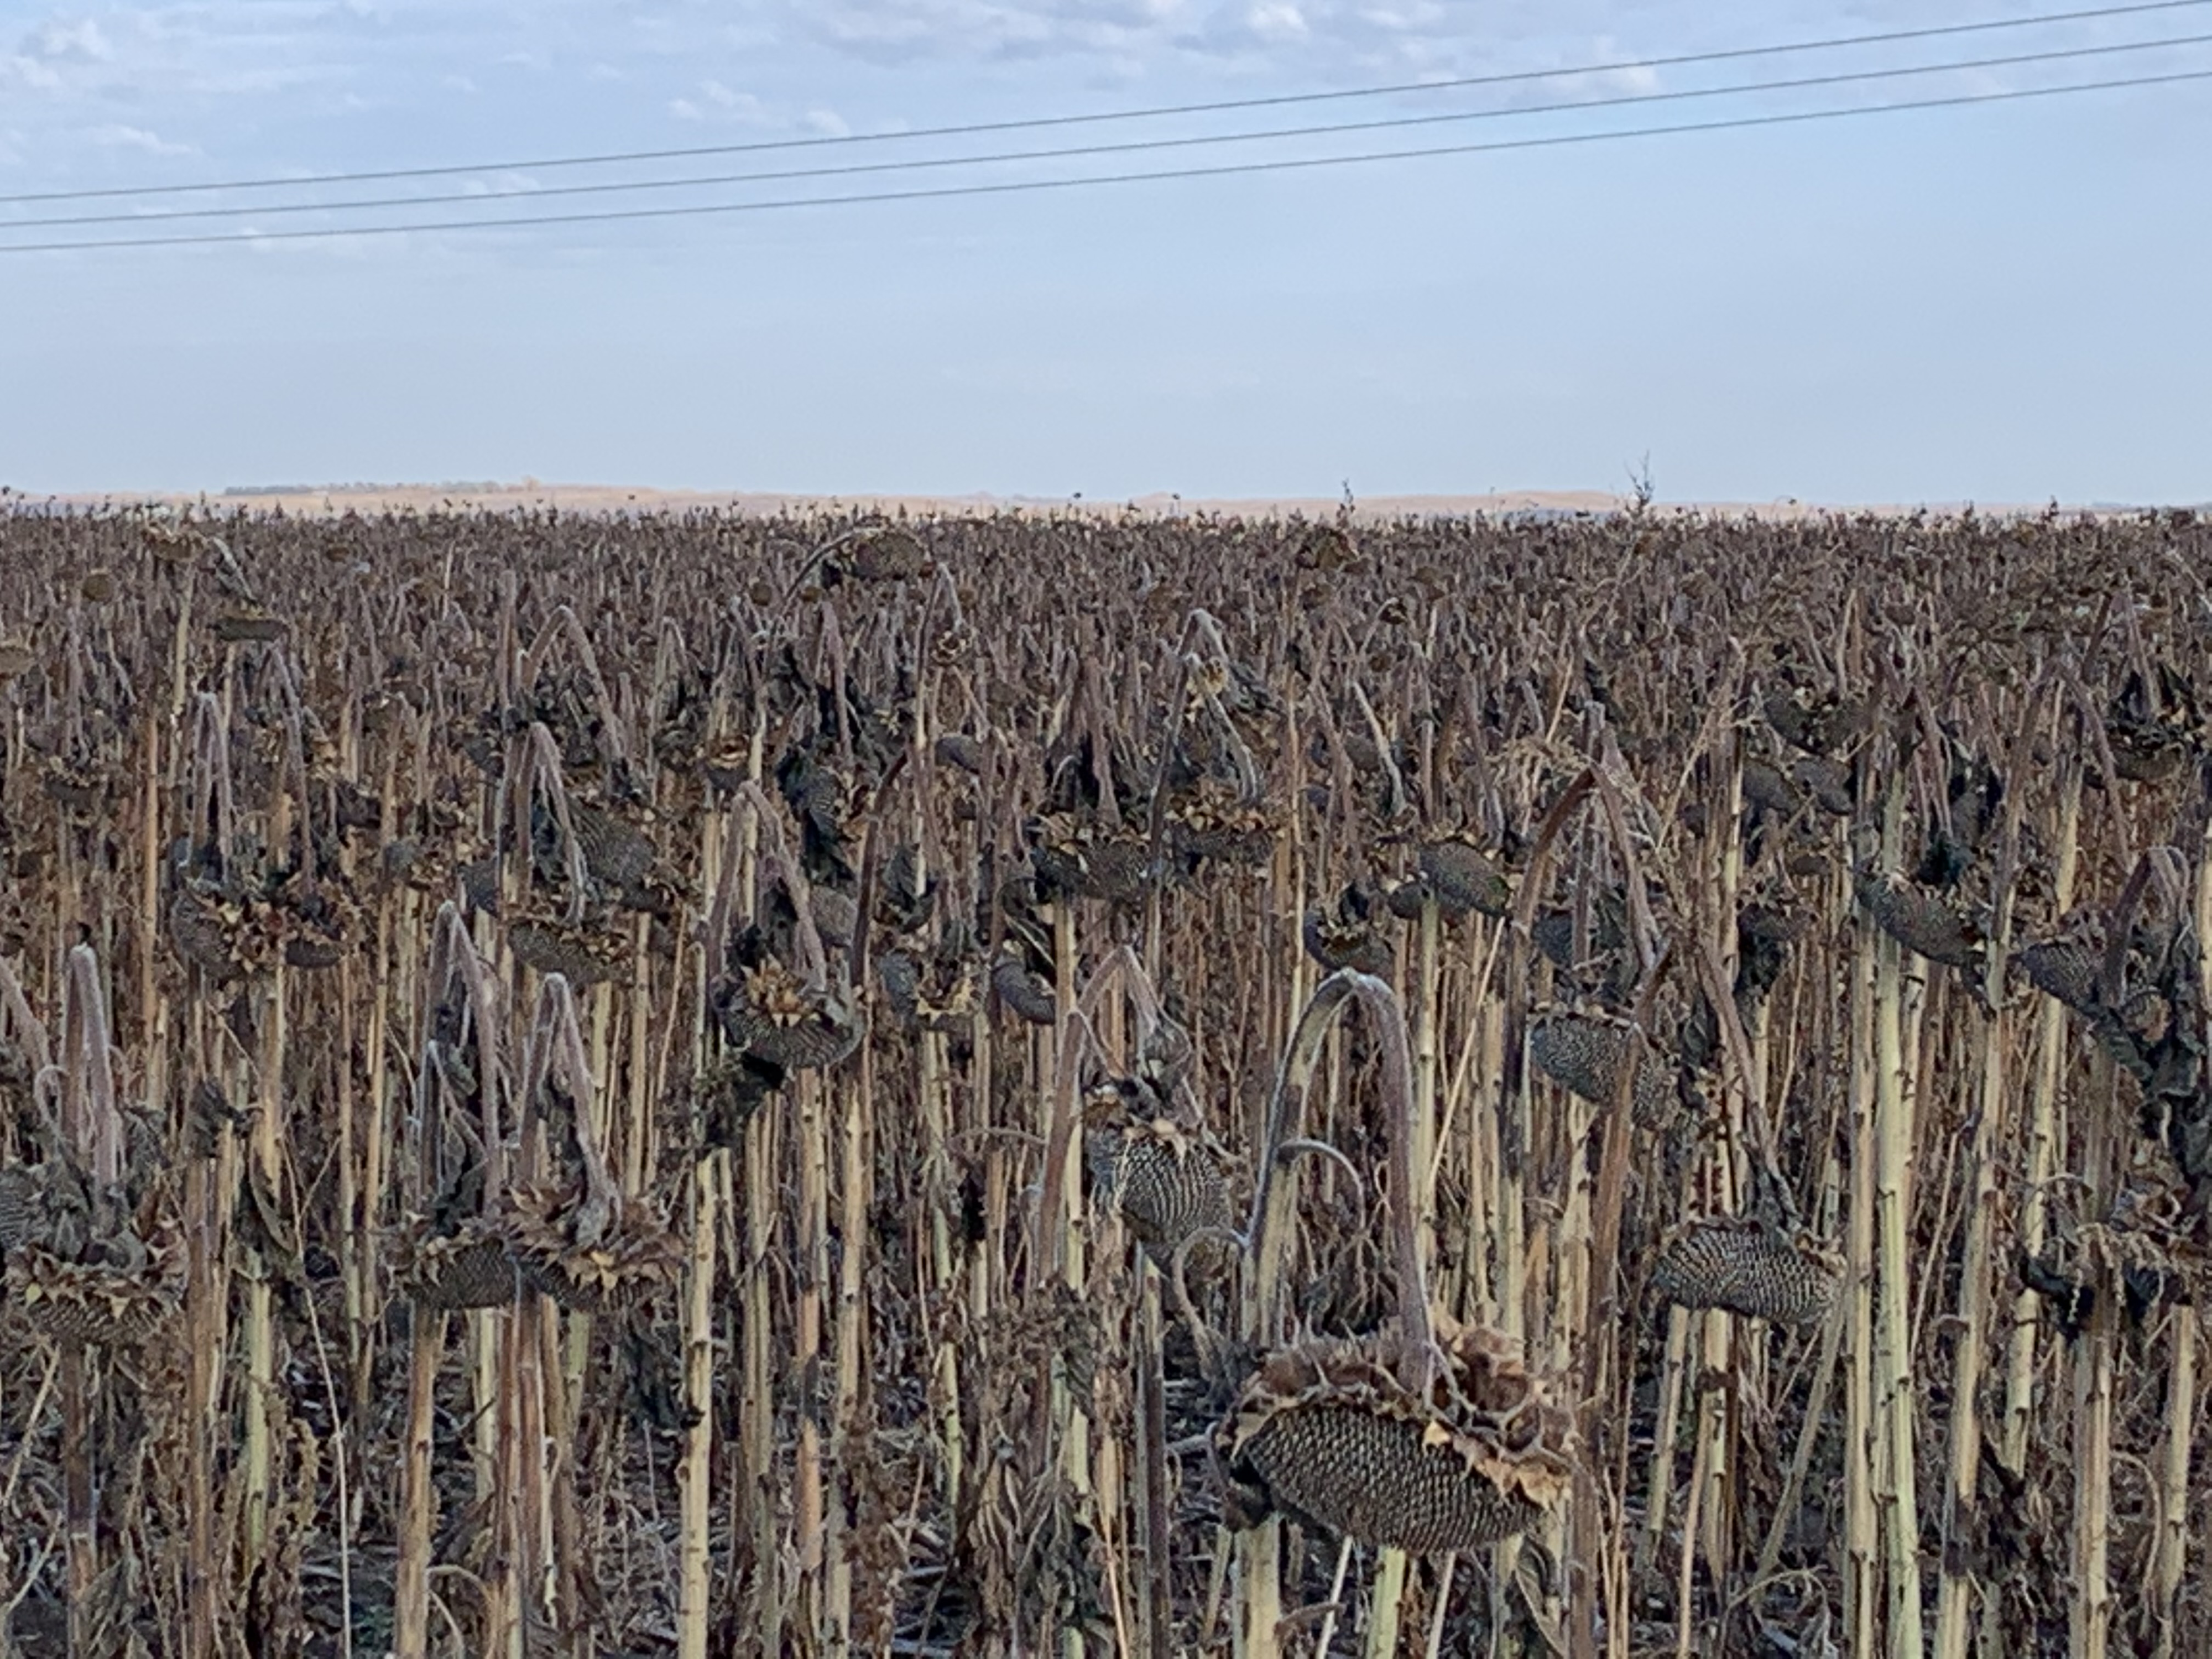 Afternoon Ag News, October 28, 2021: Bismarck grower says sunflower yields higher than expected